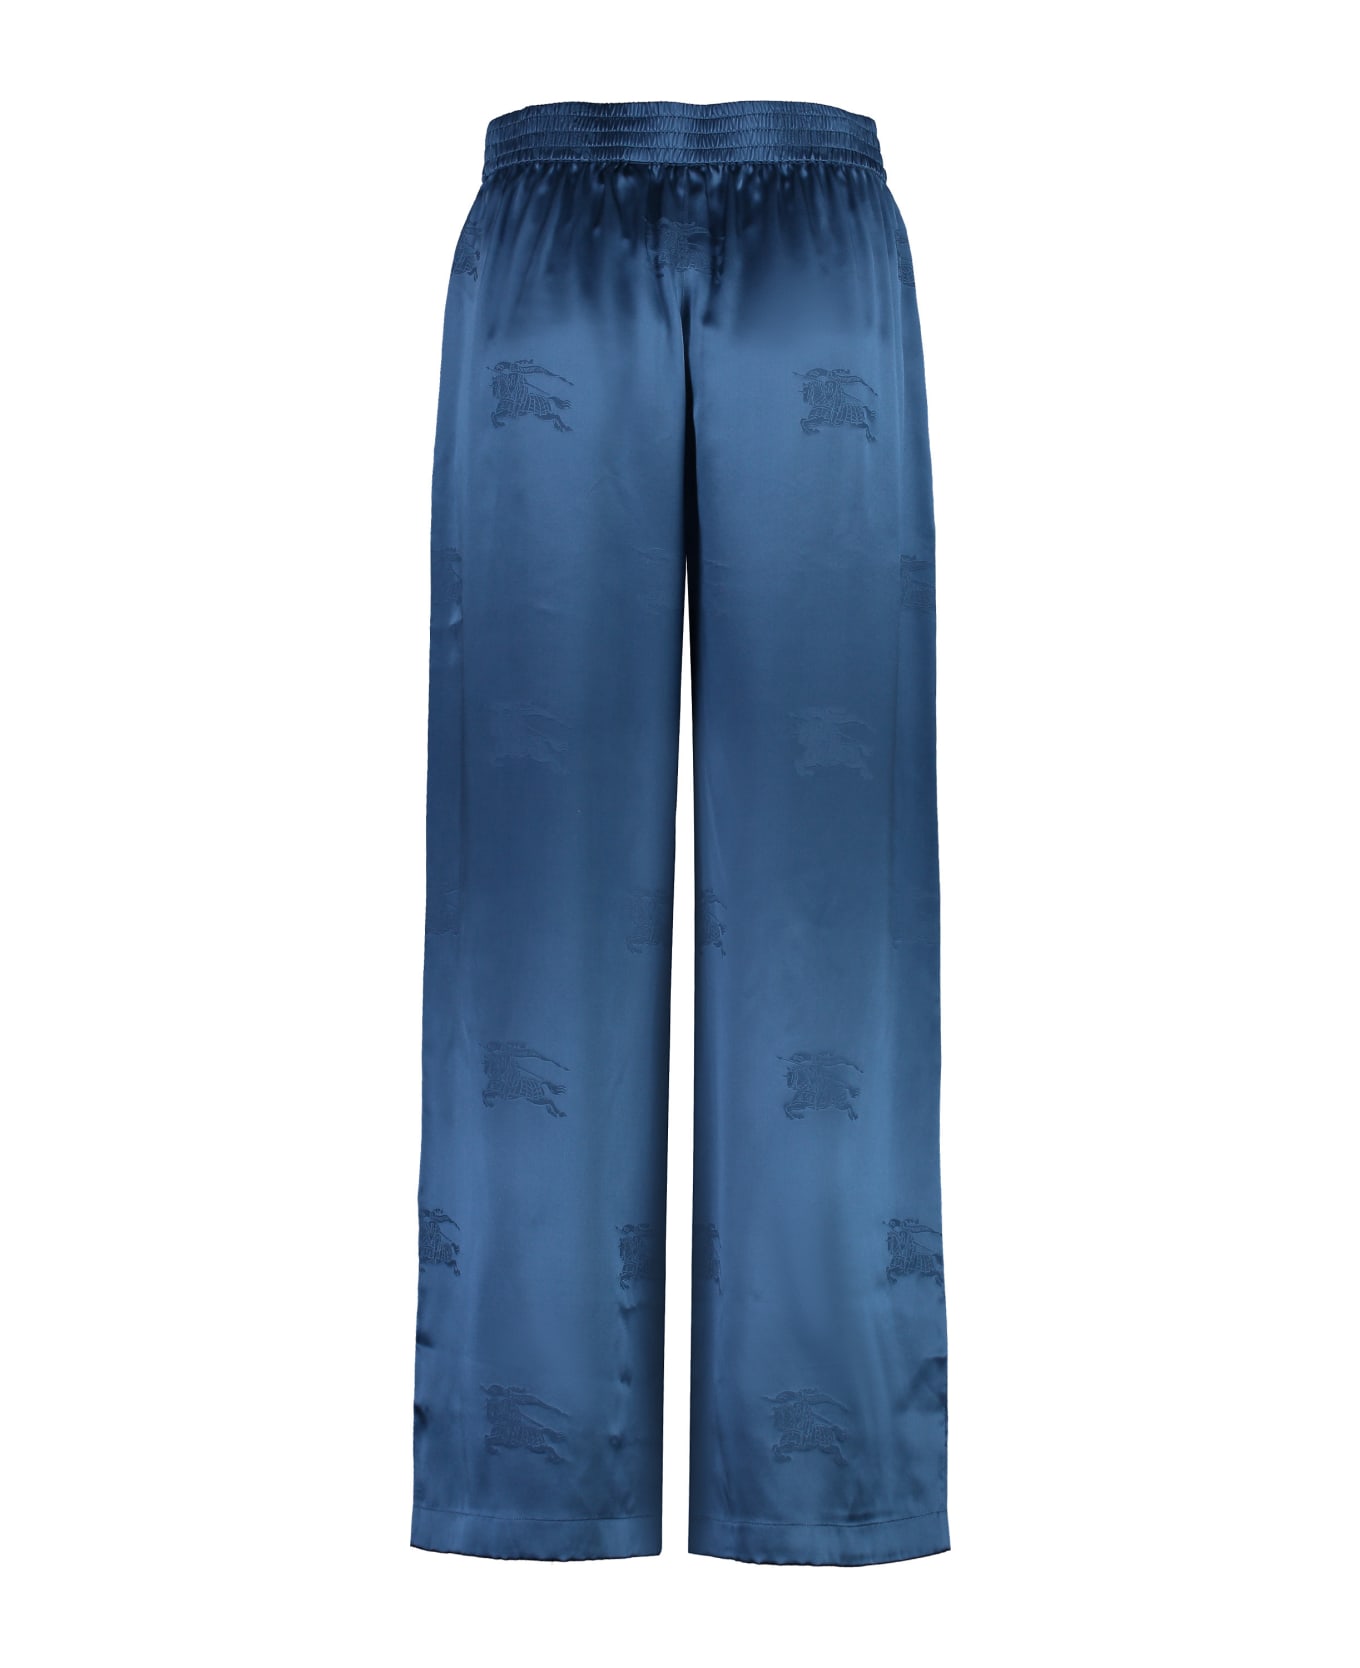 Burberry Silk Trousers - blue ボトムス